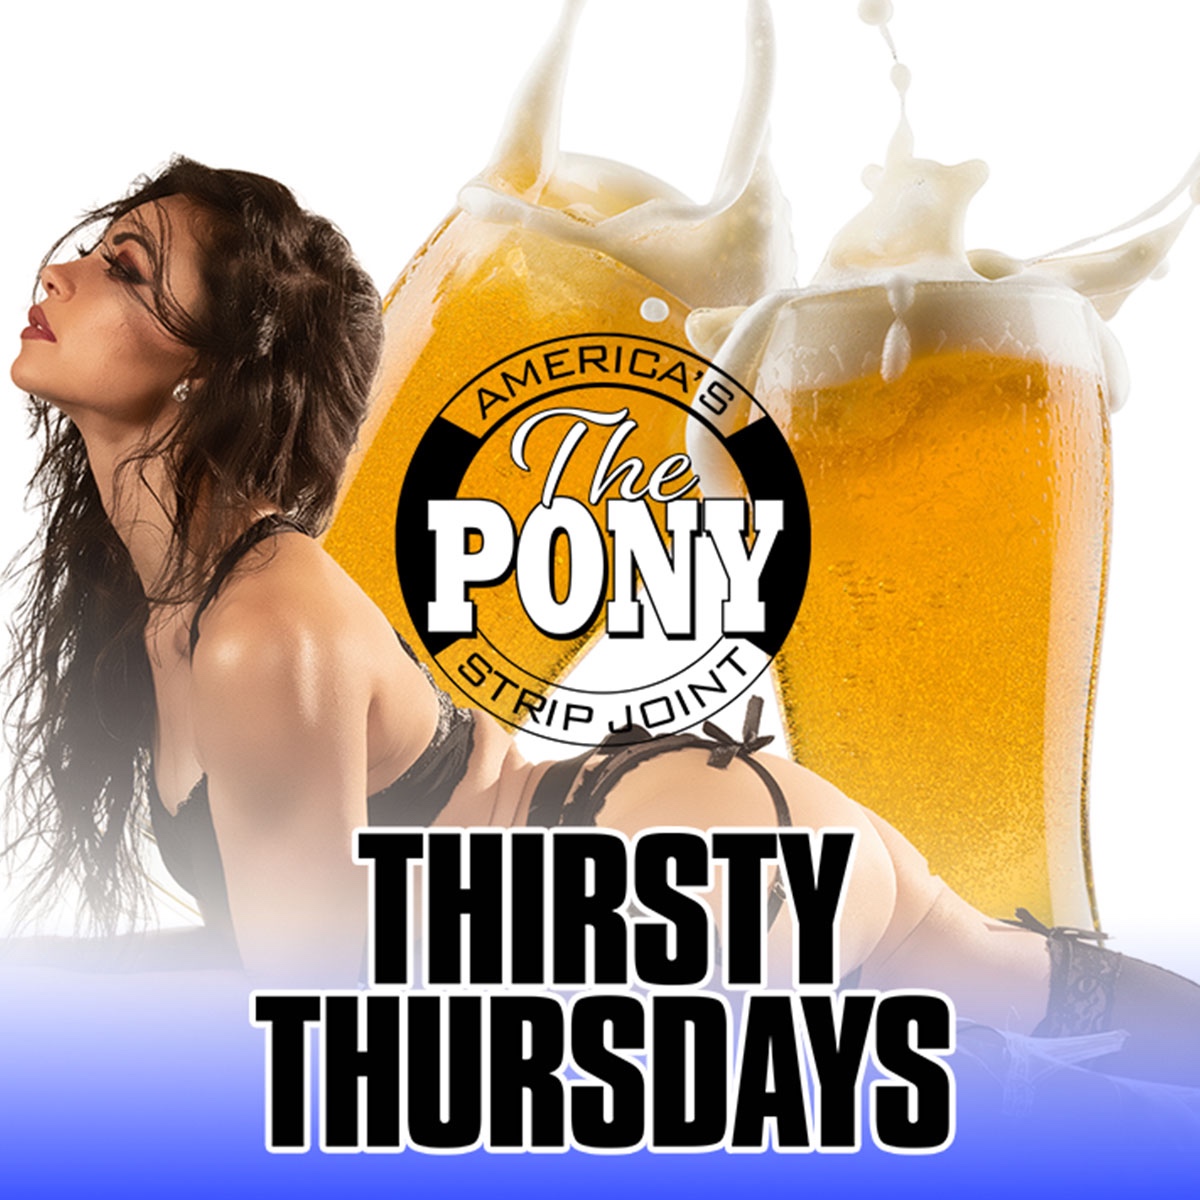 It's THURSDAY!
That means #COLLEGENIGHT at The Pony!
Get a headstart on #freakend #fun with $3 wells ALL NIGHT!!💋💋

.
.
.
#thursday #PonyParty #PonyClub #JerryWestlundPresents #AlwaysAPartyAtThePony #ThePony #thingstodo #entertainment #thirstythursday #thursdayvibe #thirstda...